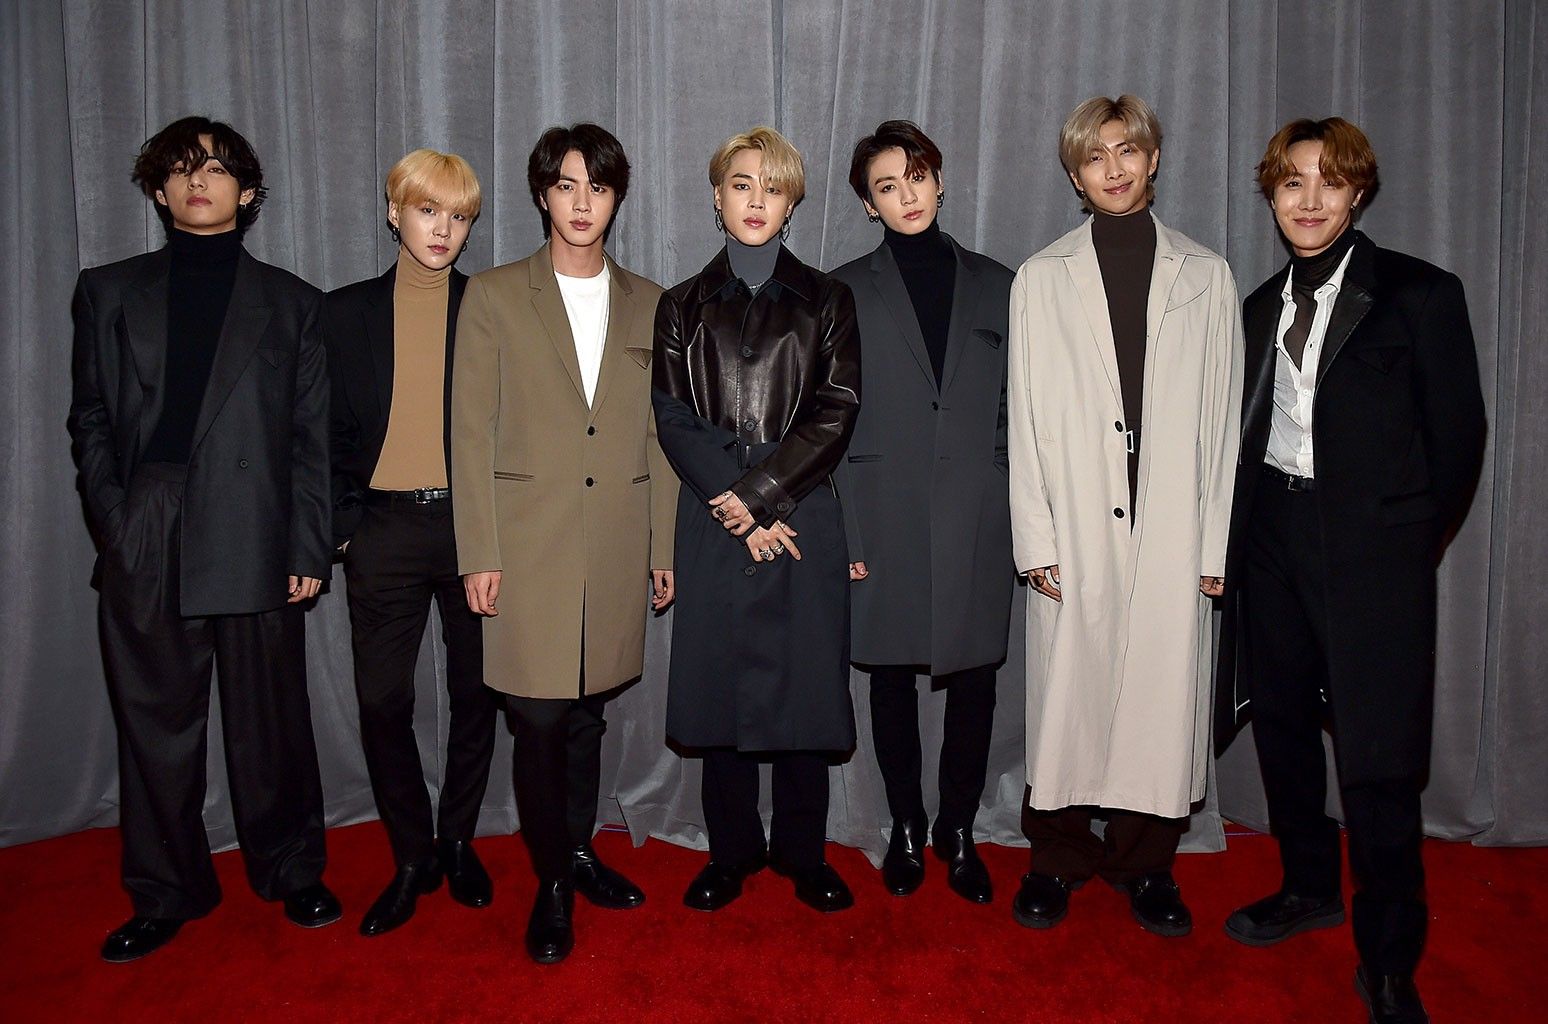 BTS' 2020 Grammy Awards Red Carpet Looks: See The Photo